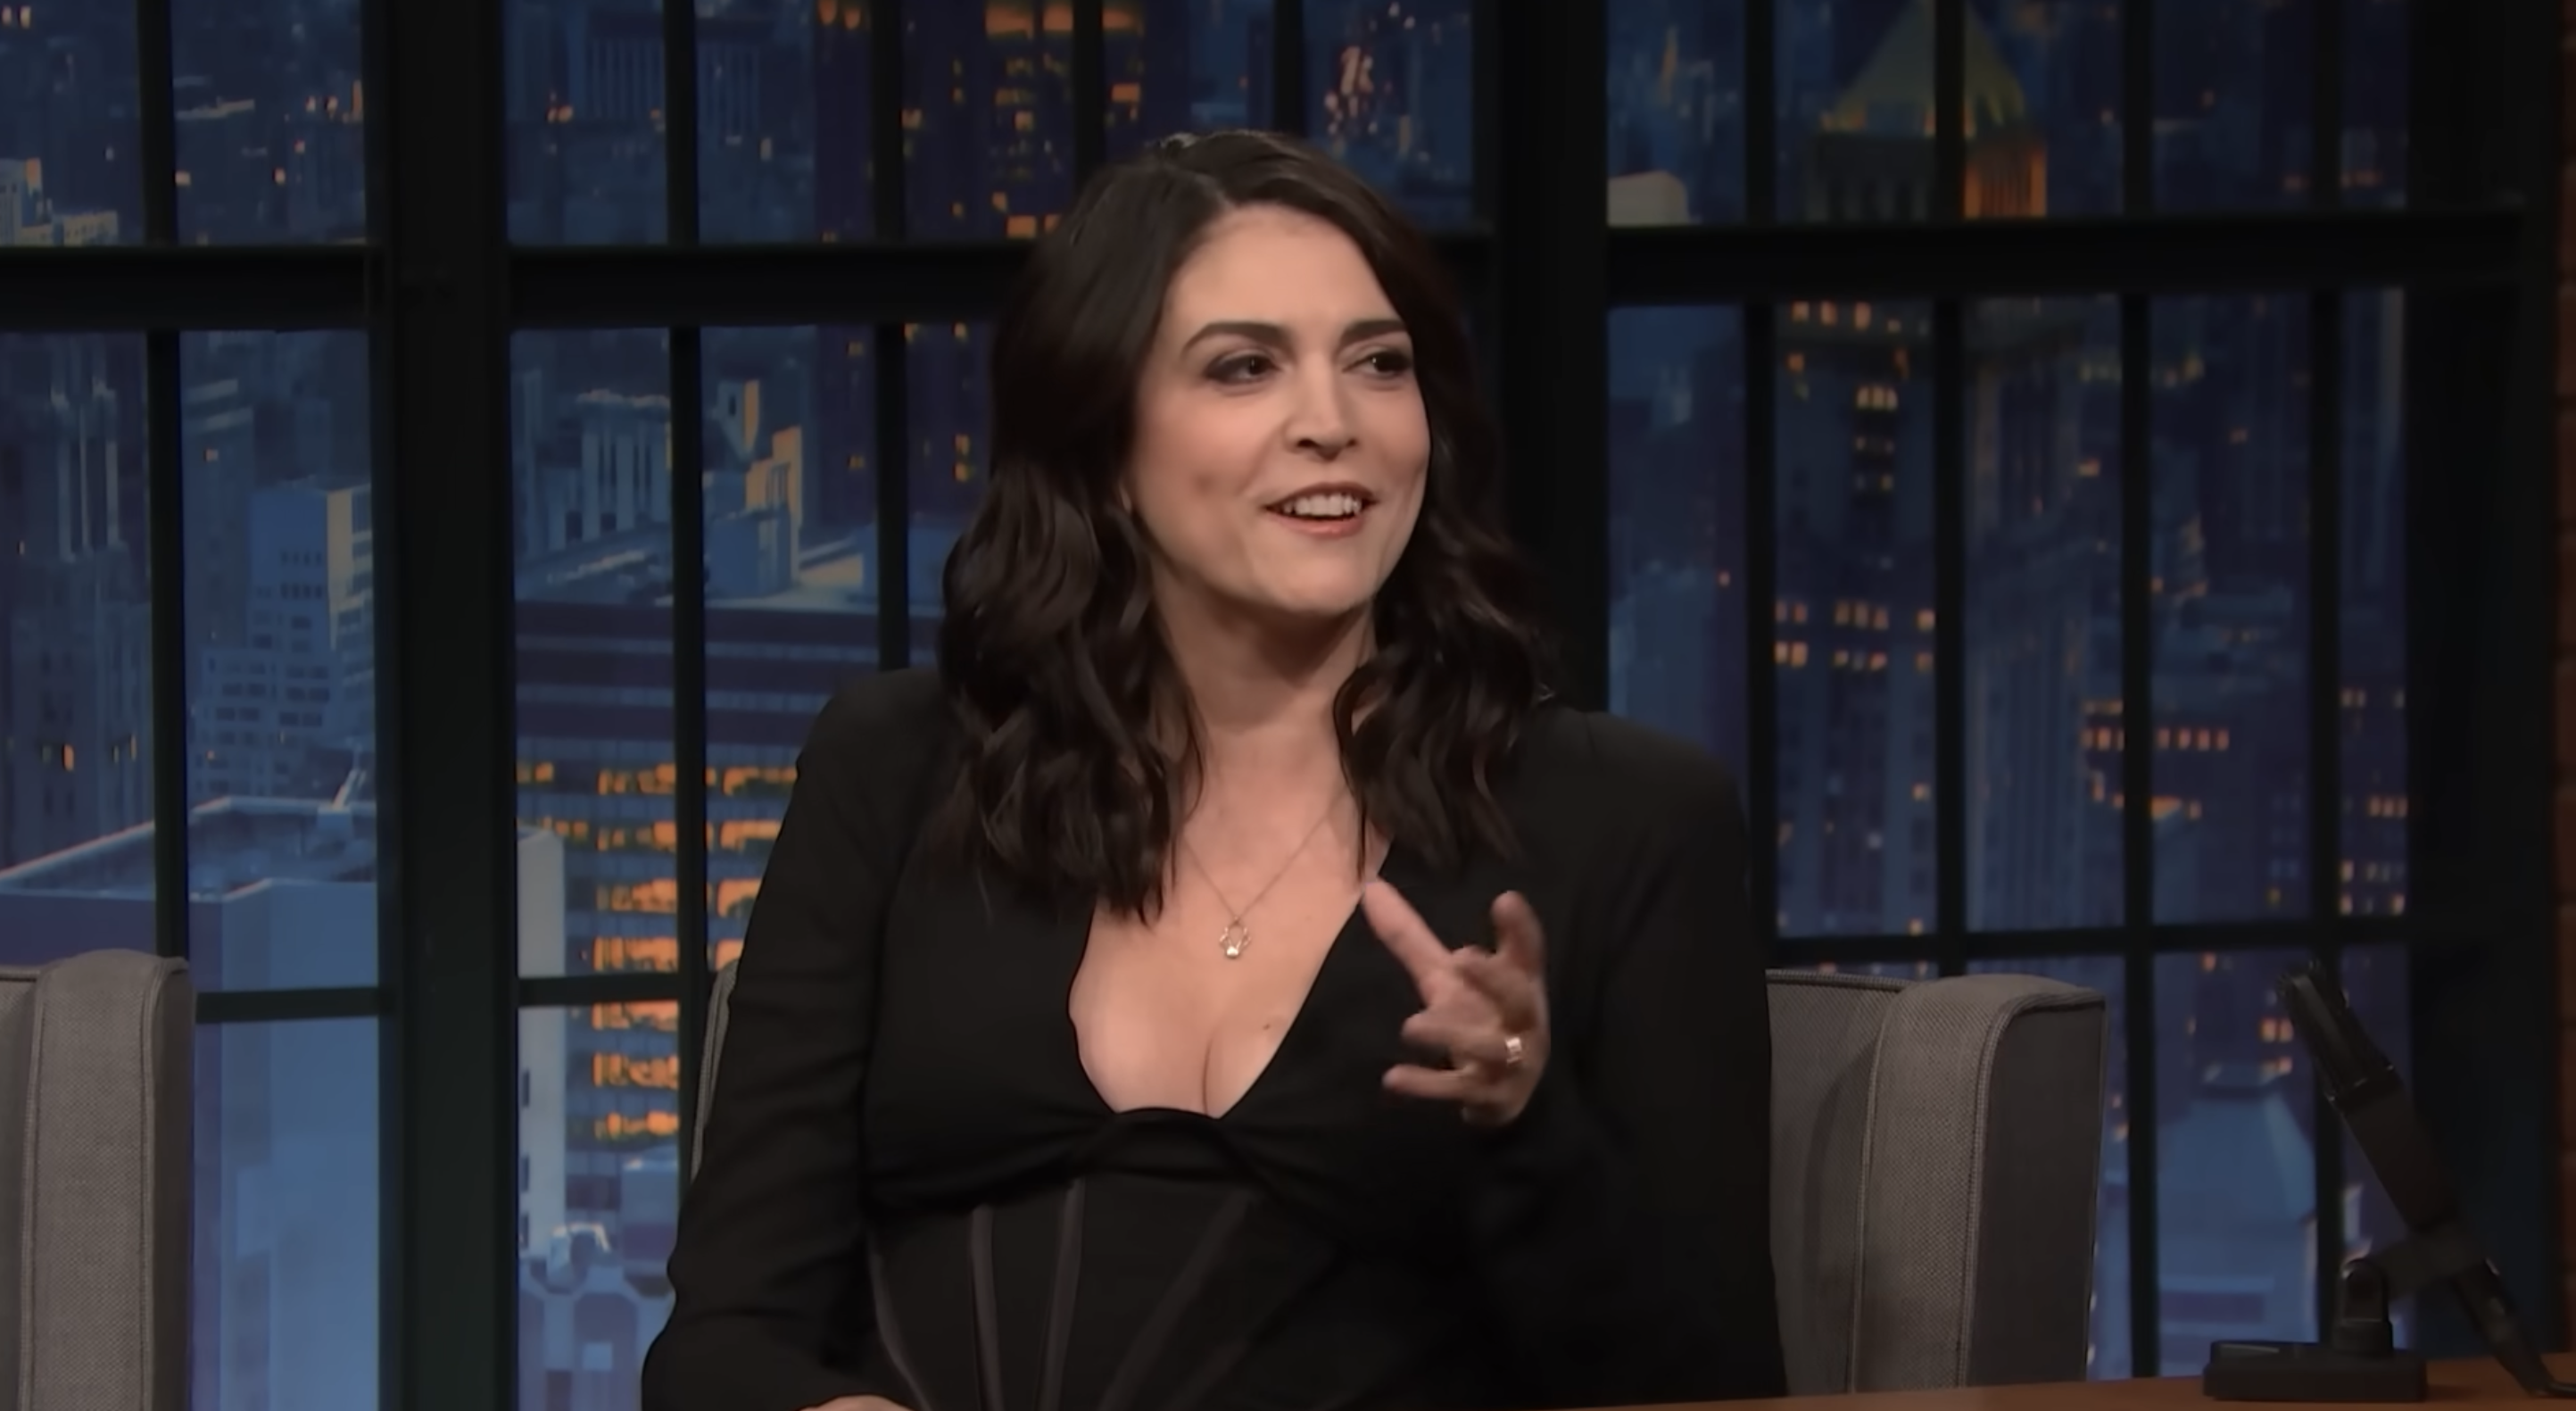 Cecily in a black outfit sitting, gesturing on the talk show